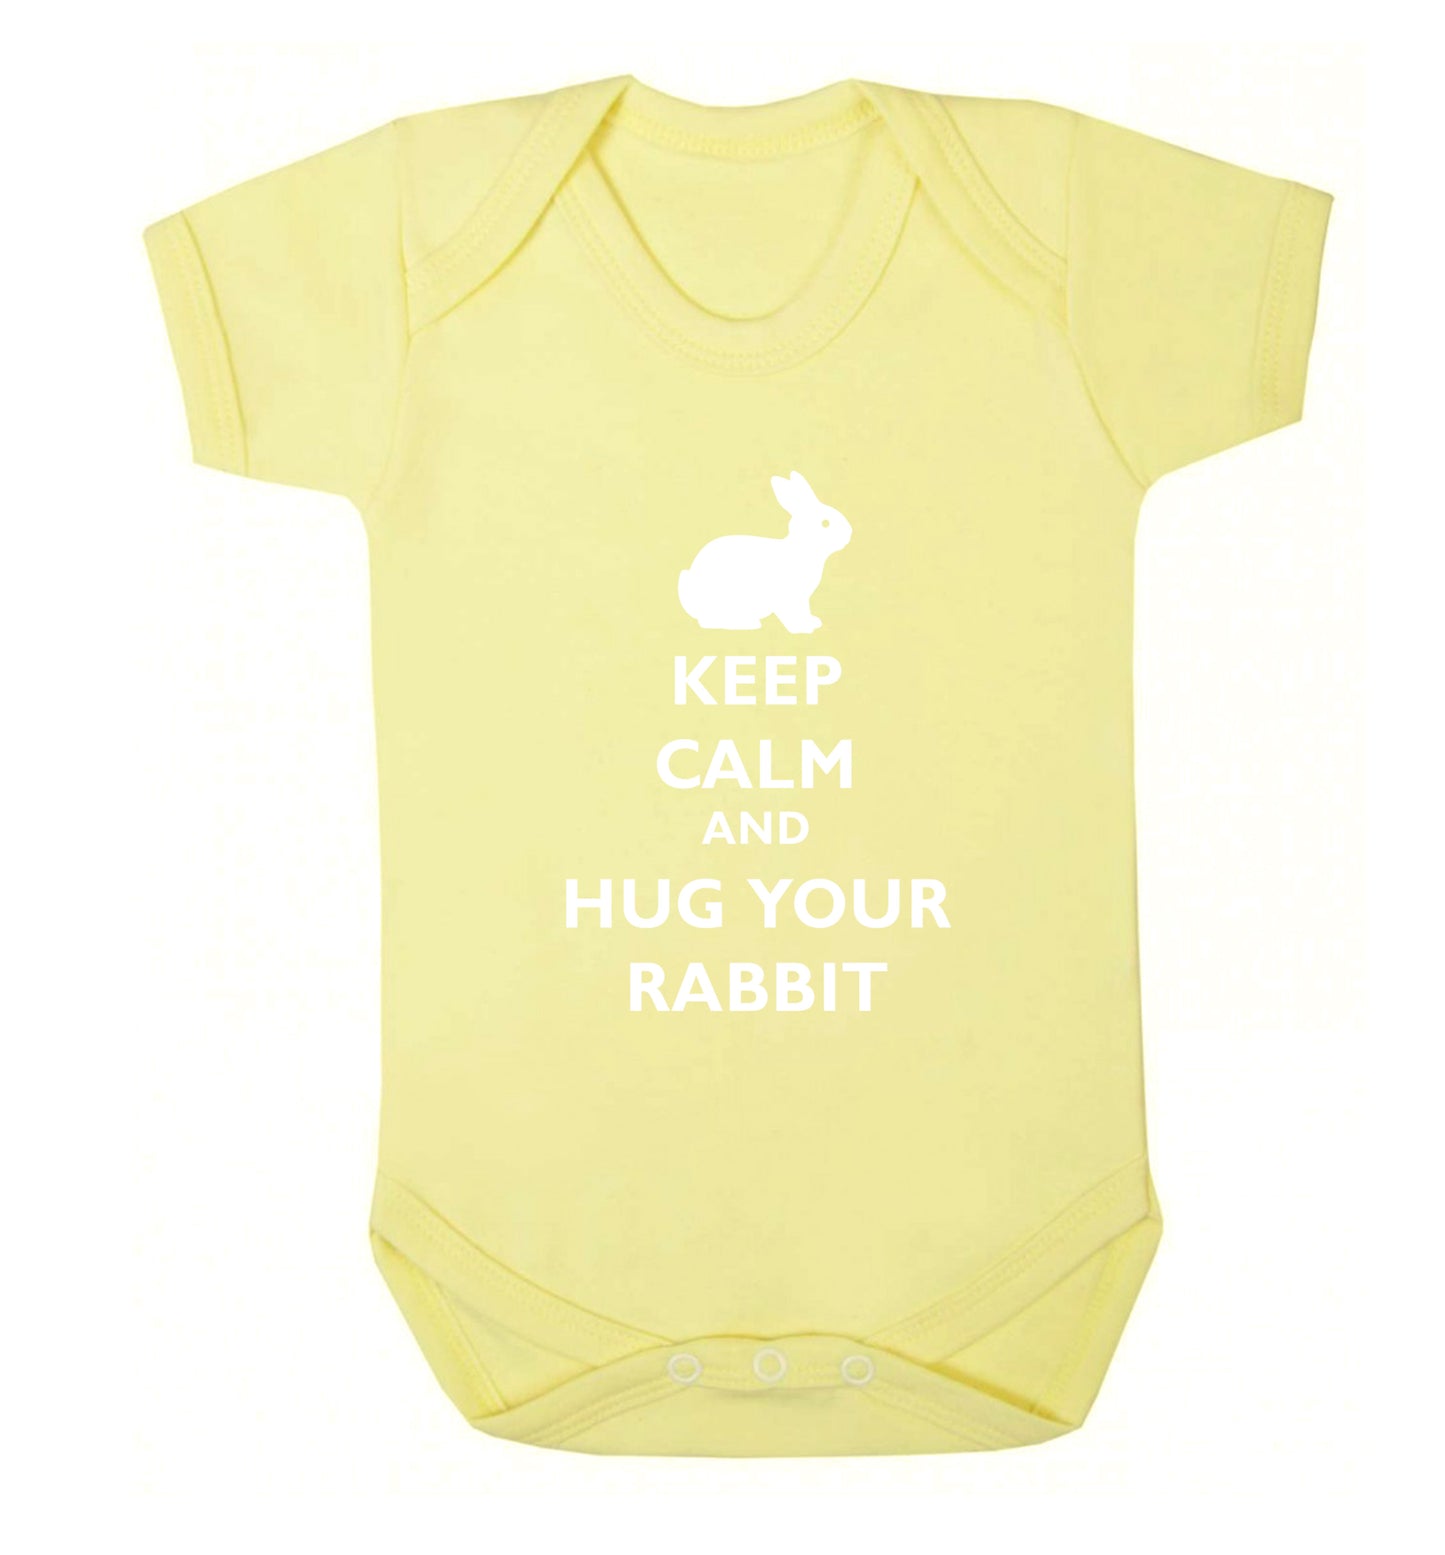 Keep calm and hug your rabbit Baby Vest pale yellow 18-24 months